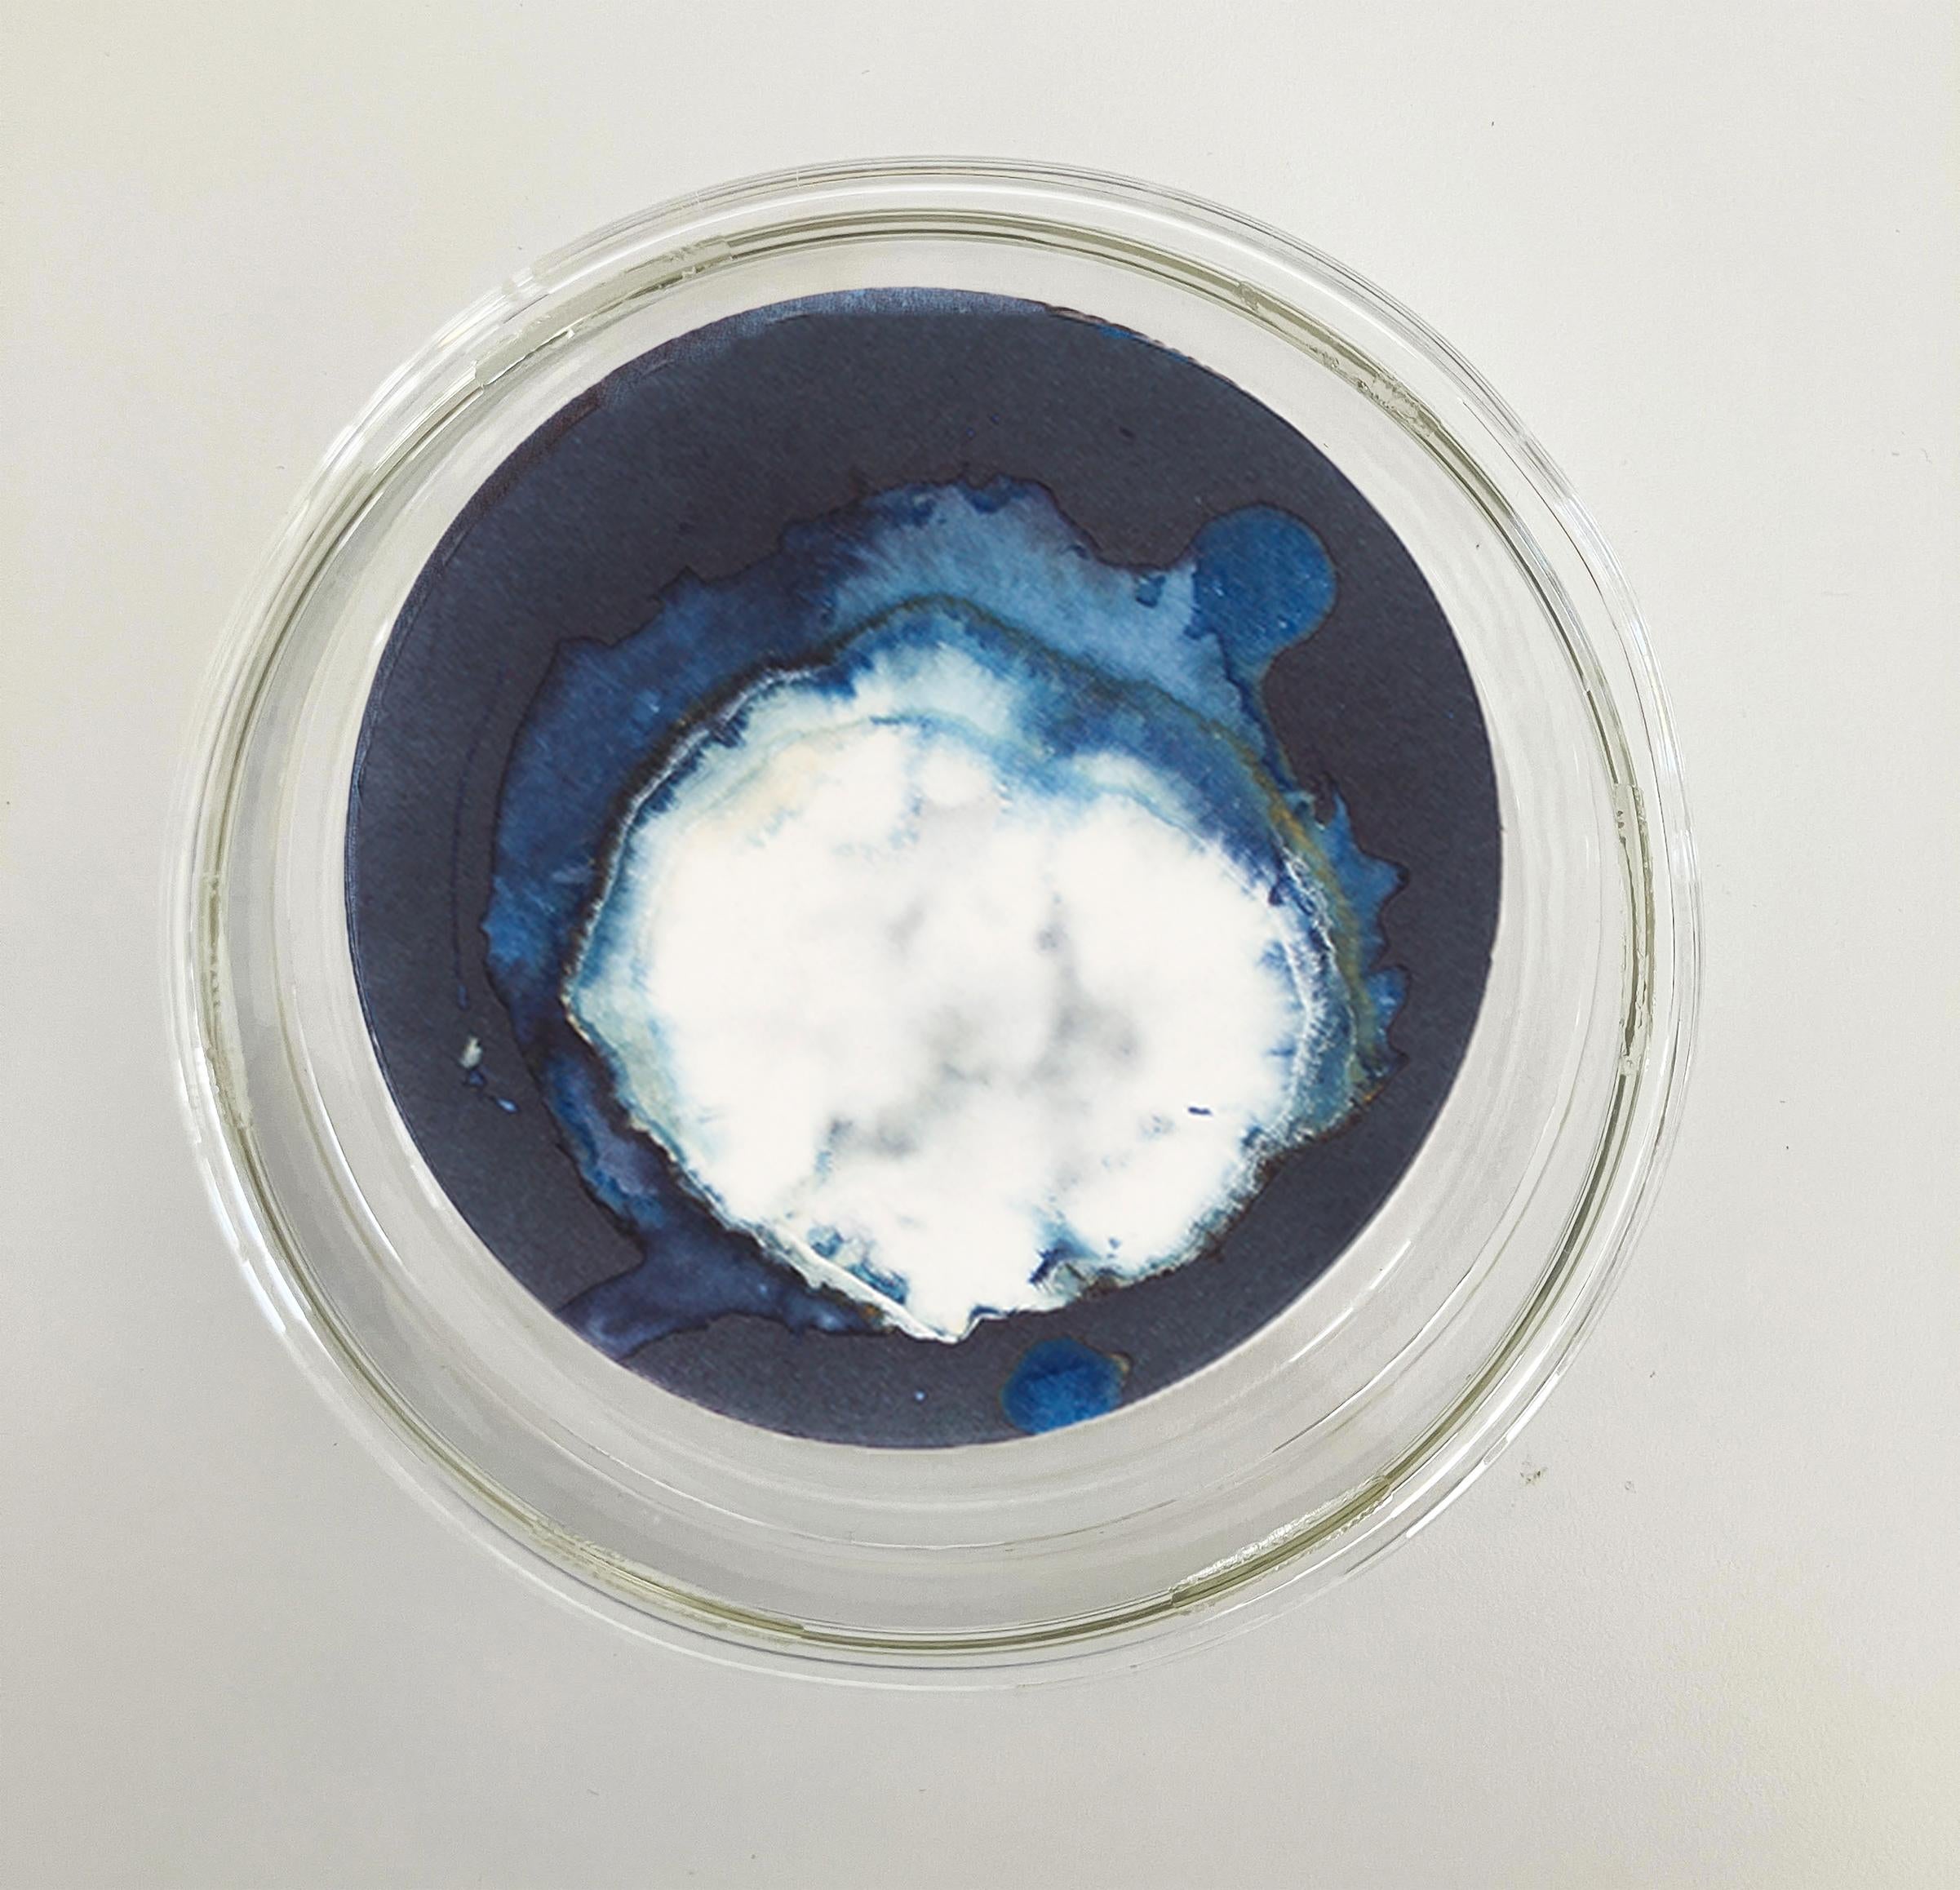 Esponjas 8, 11 y 16. Cyanotype photograhs mounted in high resistance glass dish - Sculpture by Paola Davila